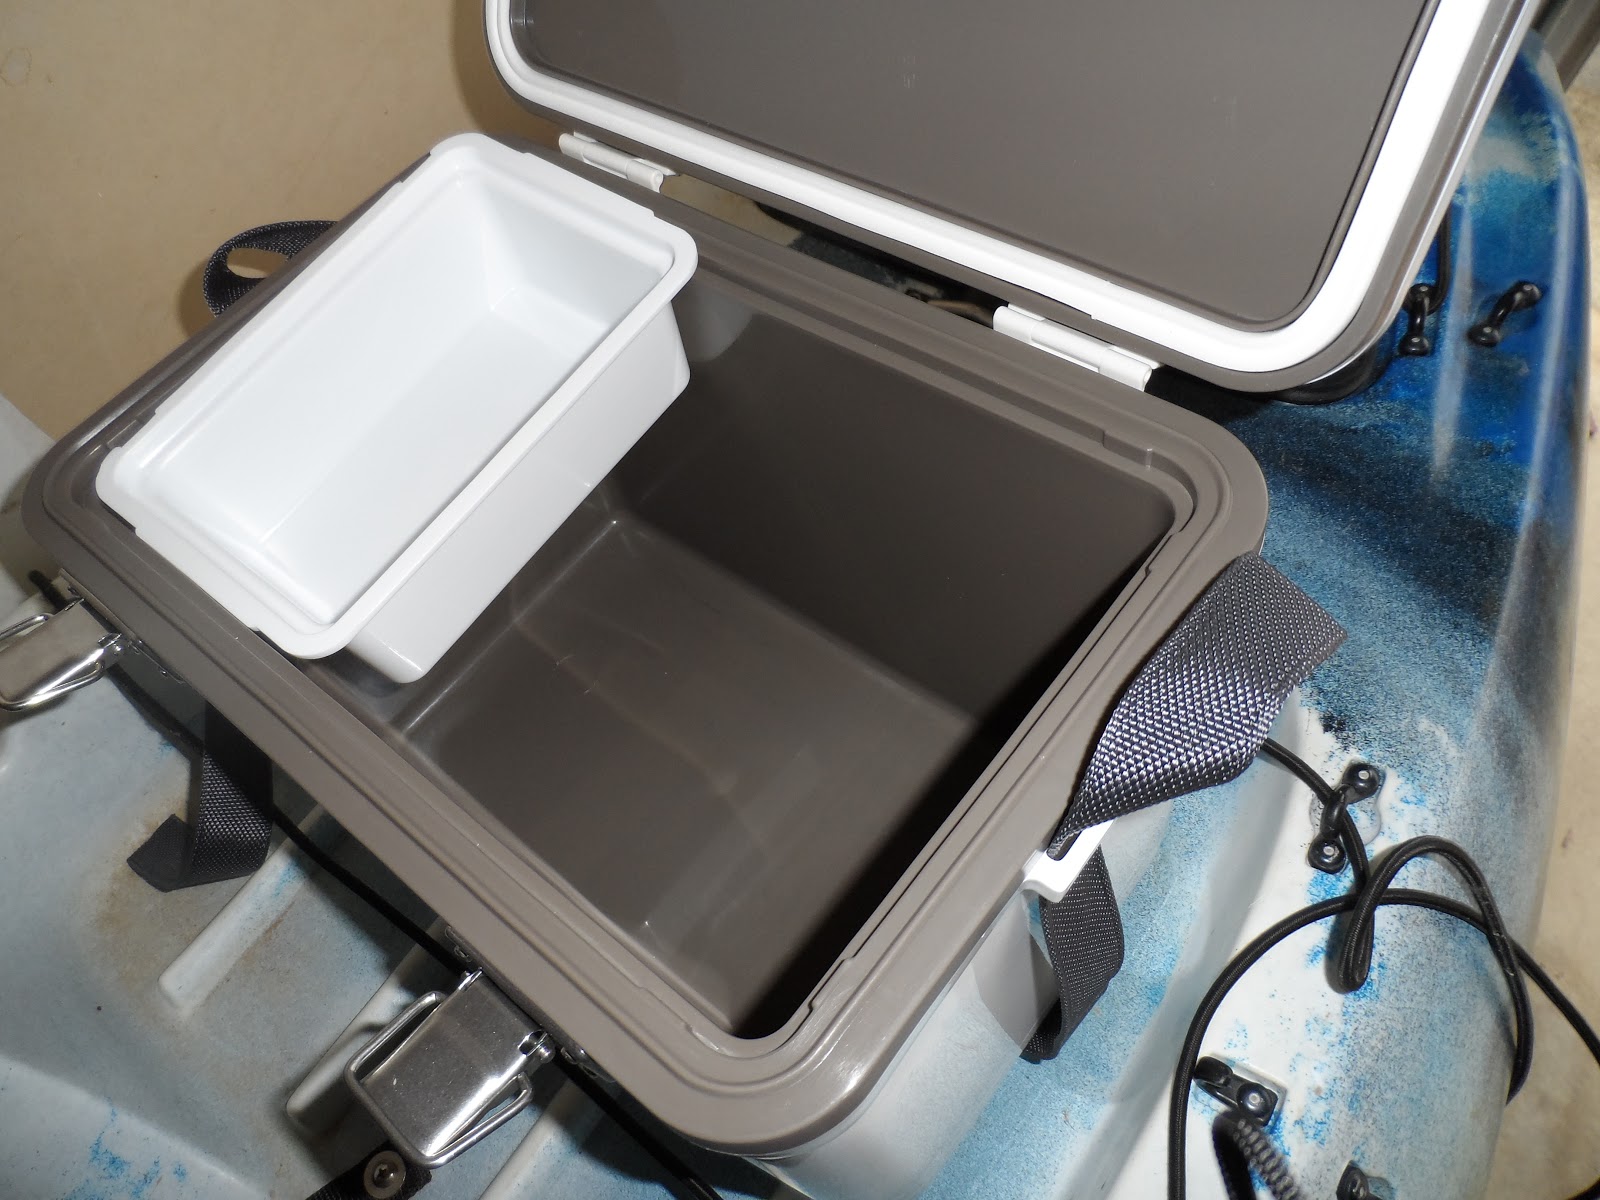 Engel Cooler/Dry Box Review